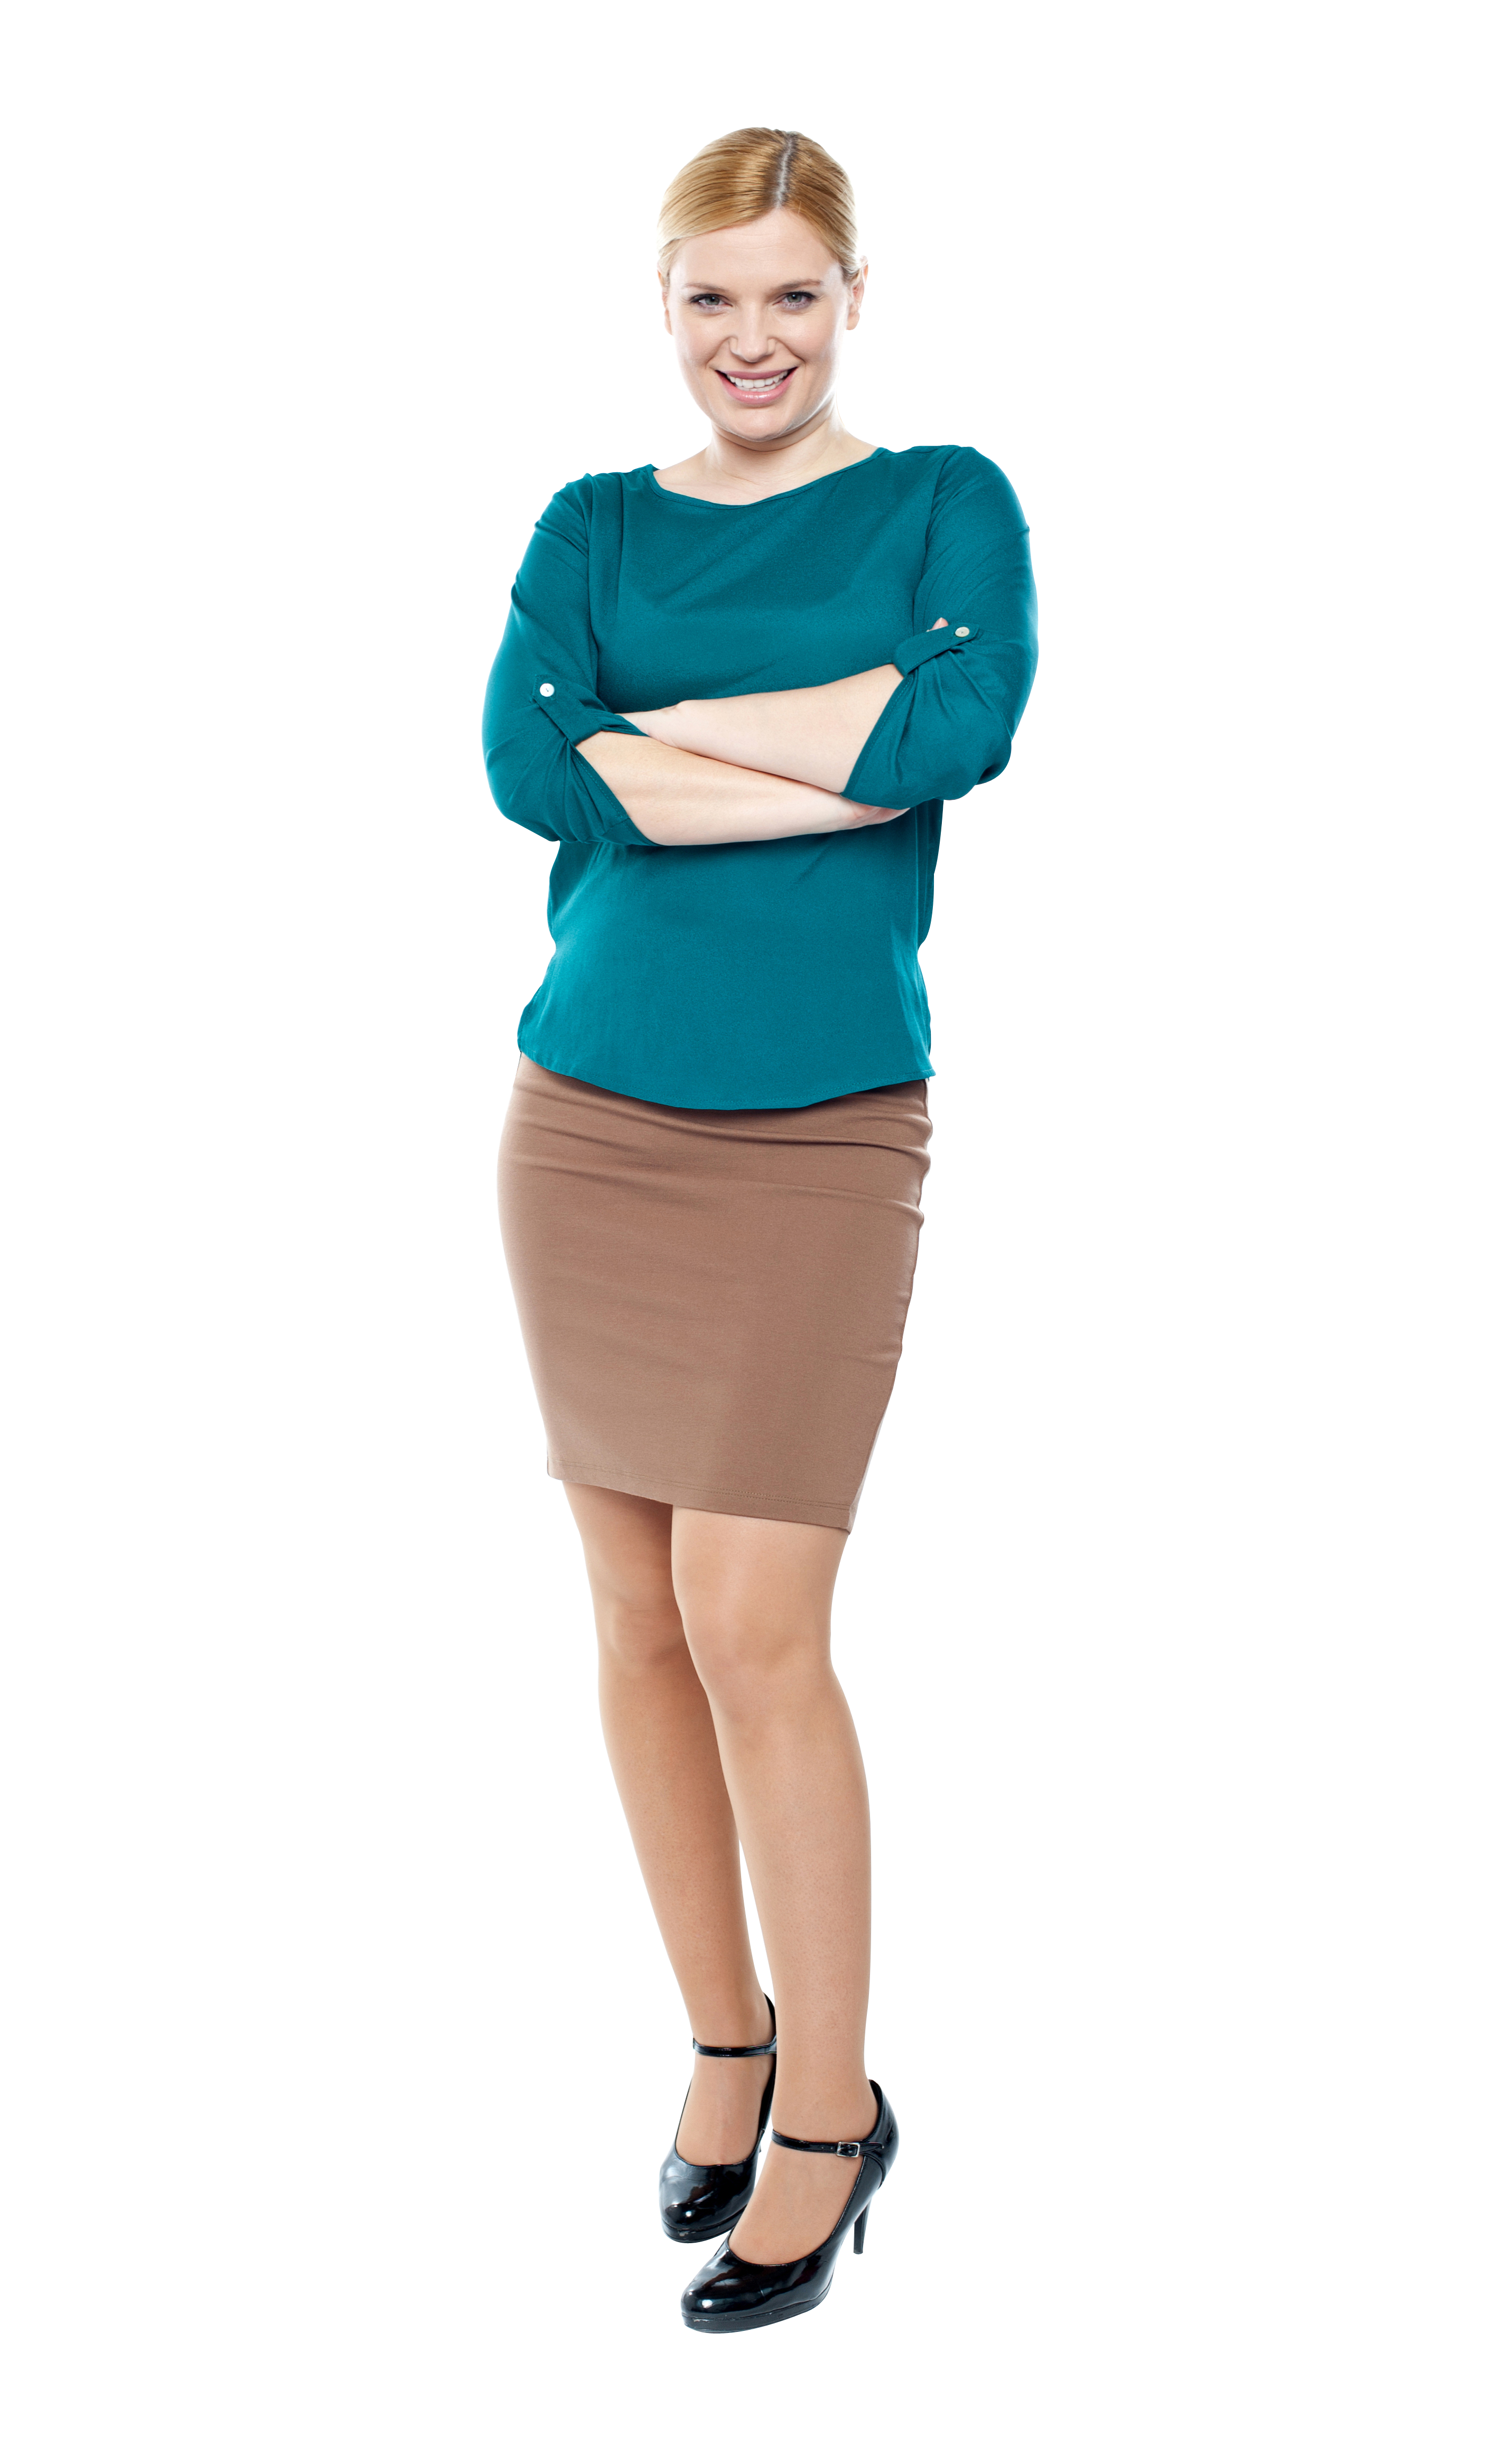 Standing Women PNG Image - PurePNG | Free transparent CC0 PNG Image Library